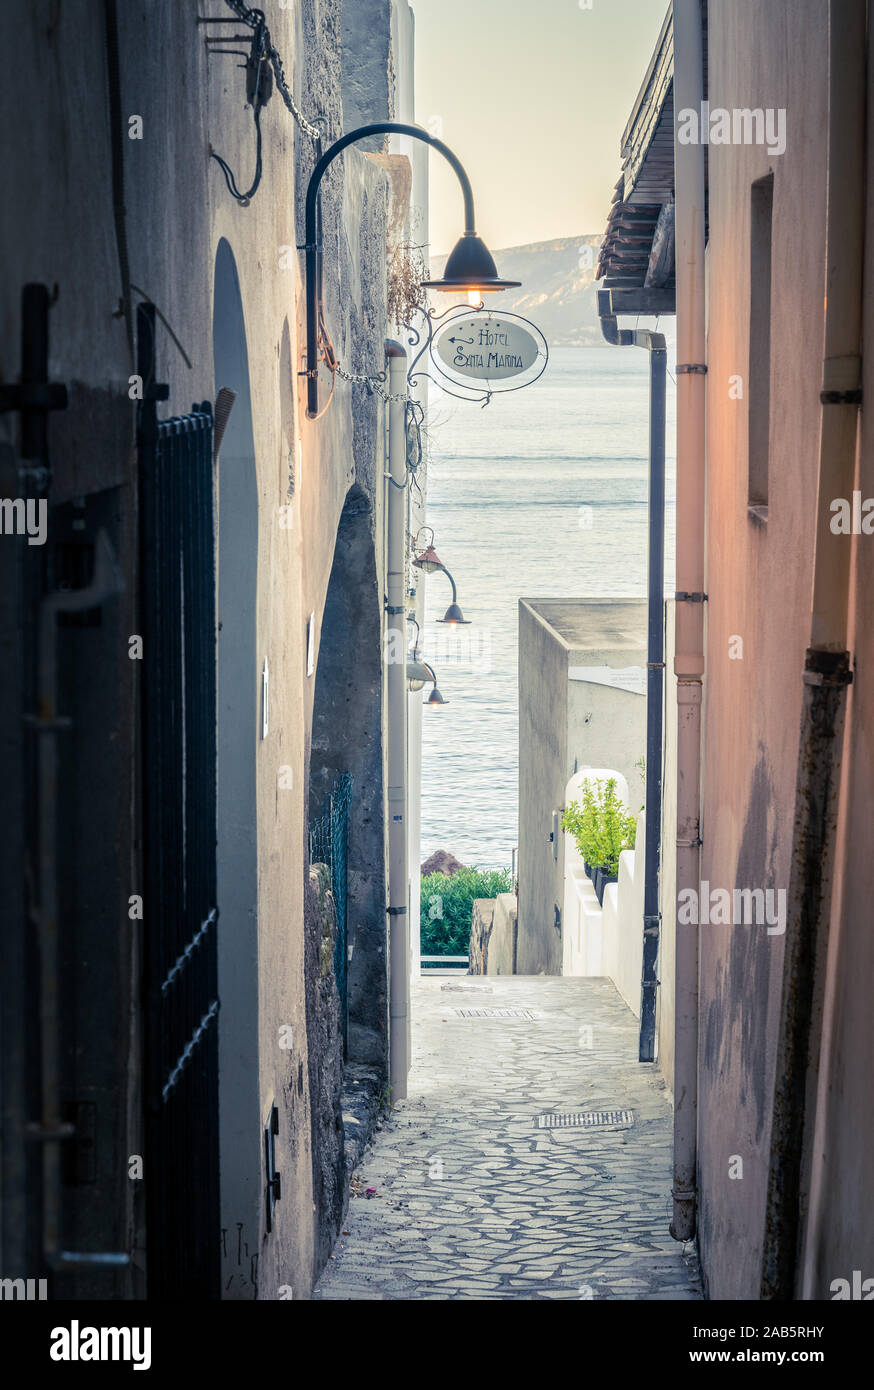 View down a pedestrian street in the town of Santa Marina on Salina island in Italy Stock Photo